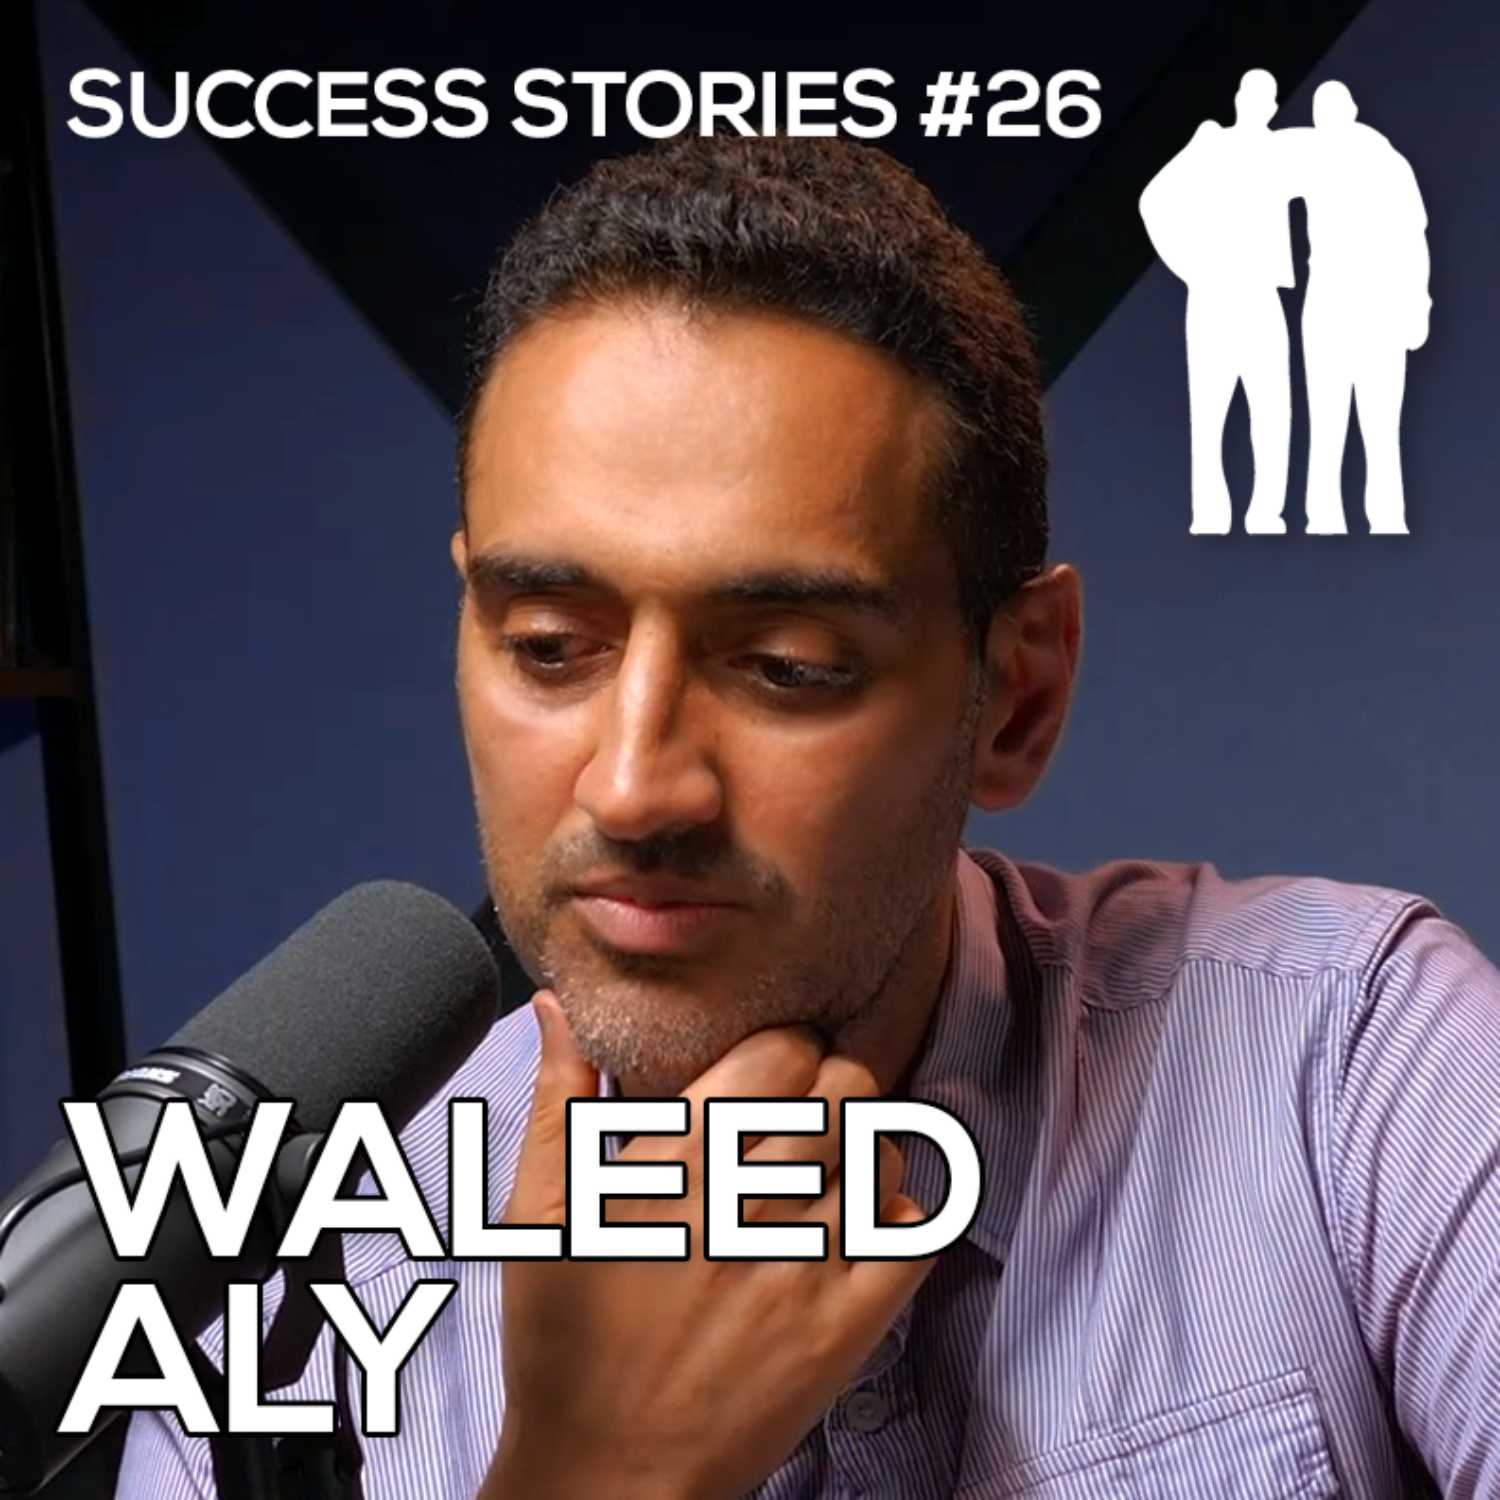 Success Stories - Waleed Aly